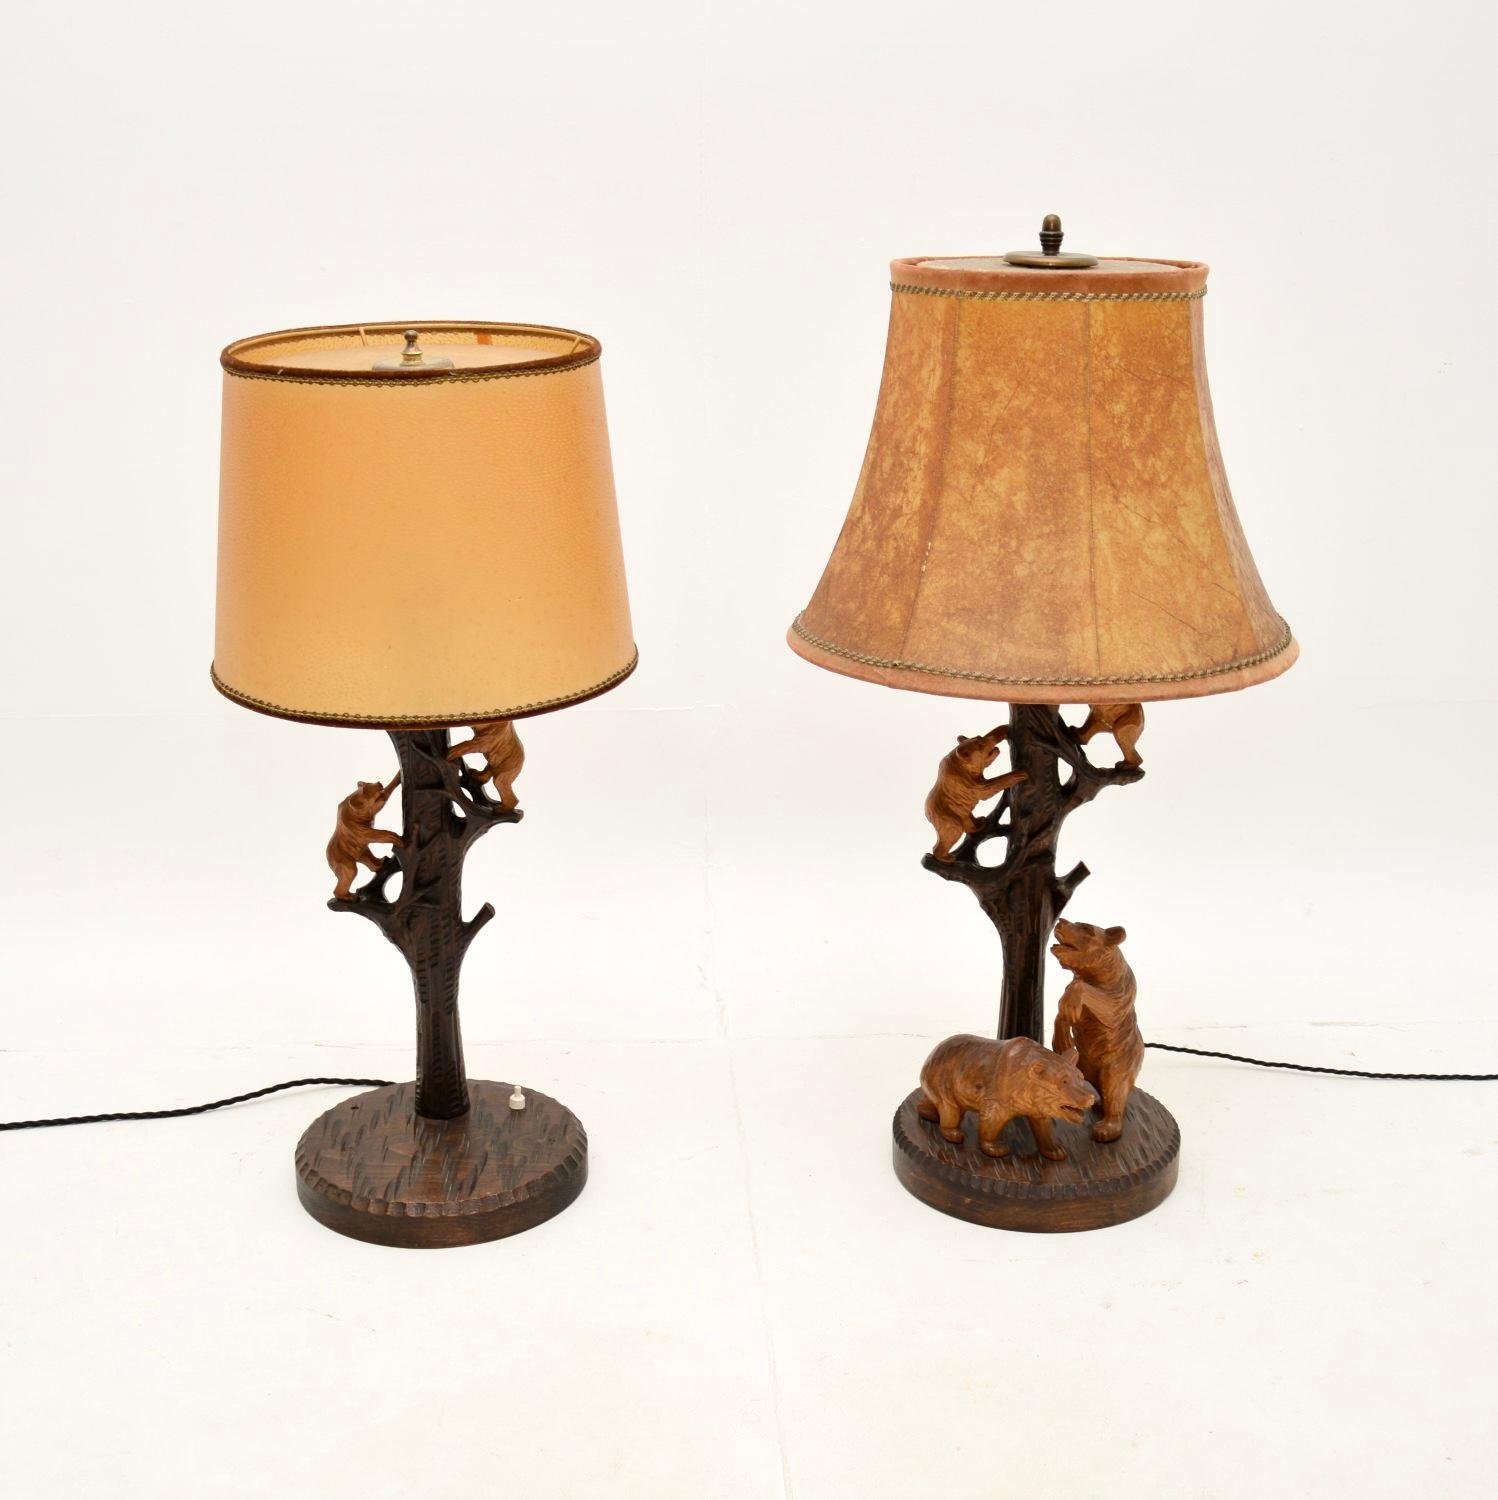 A charming matched pair of vintage German black forest table lamps. They were recently imported from Germany, they date from around the 1950’s.

The quality is superb, the stands are beautifully carved depicting tree trunks, and each has wonderful